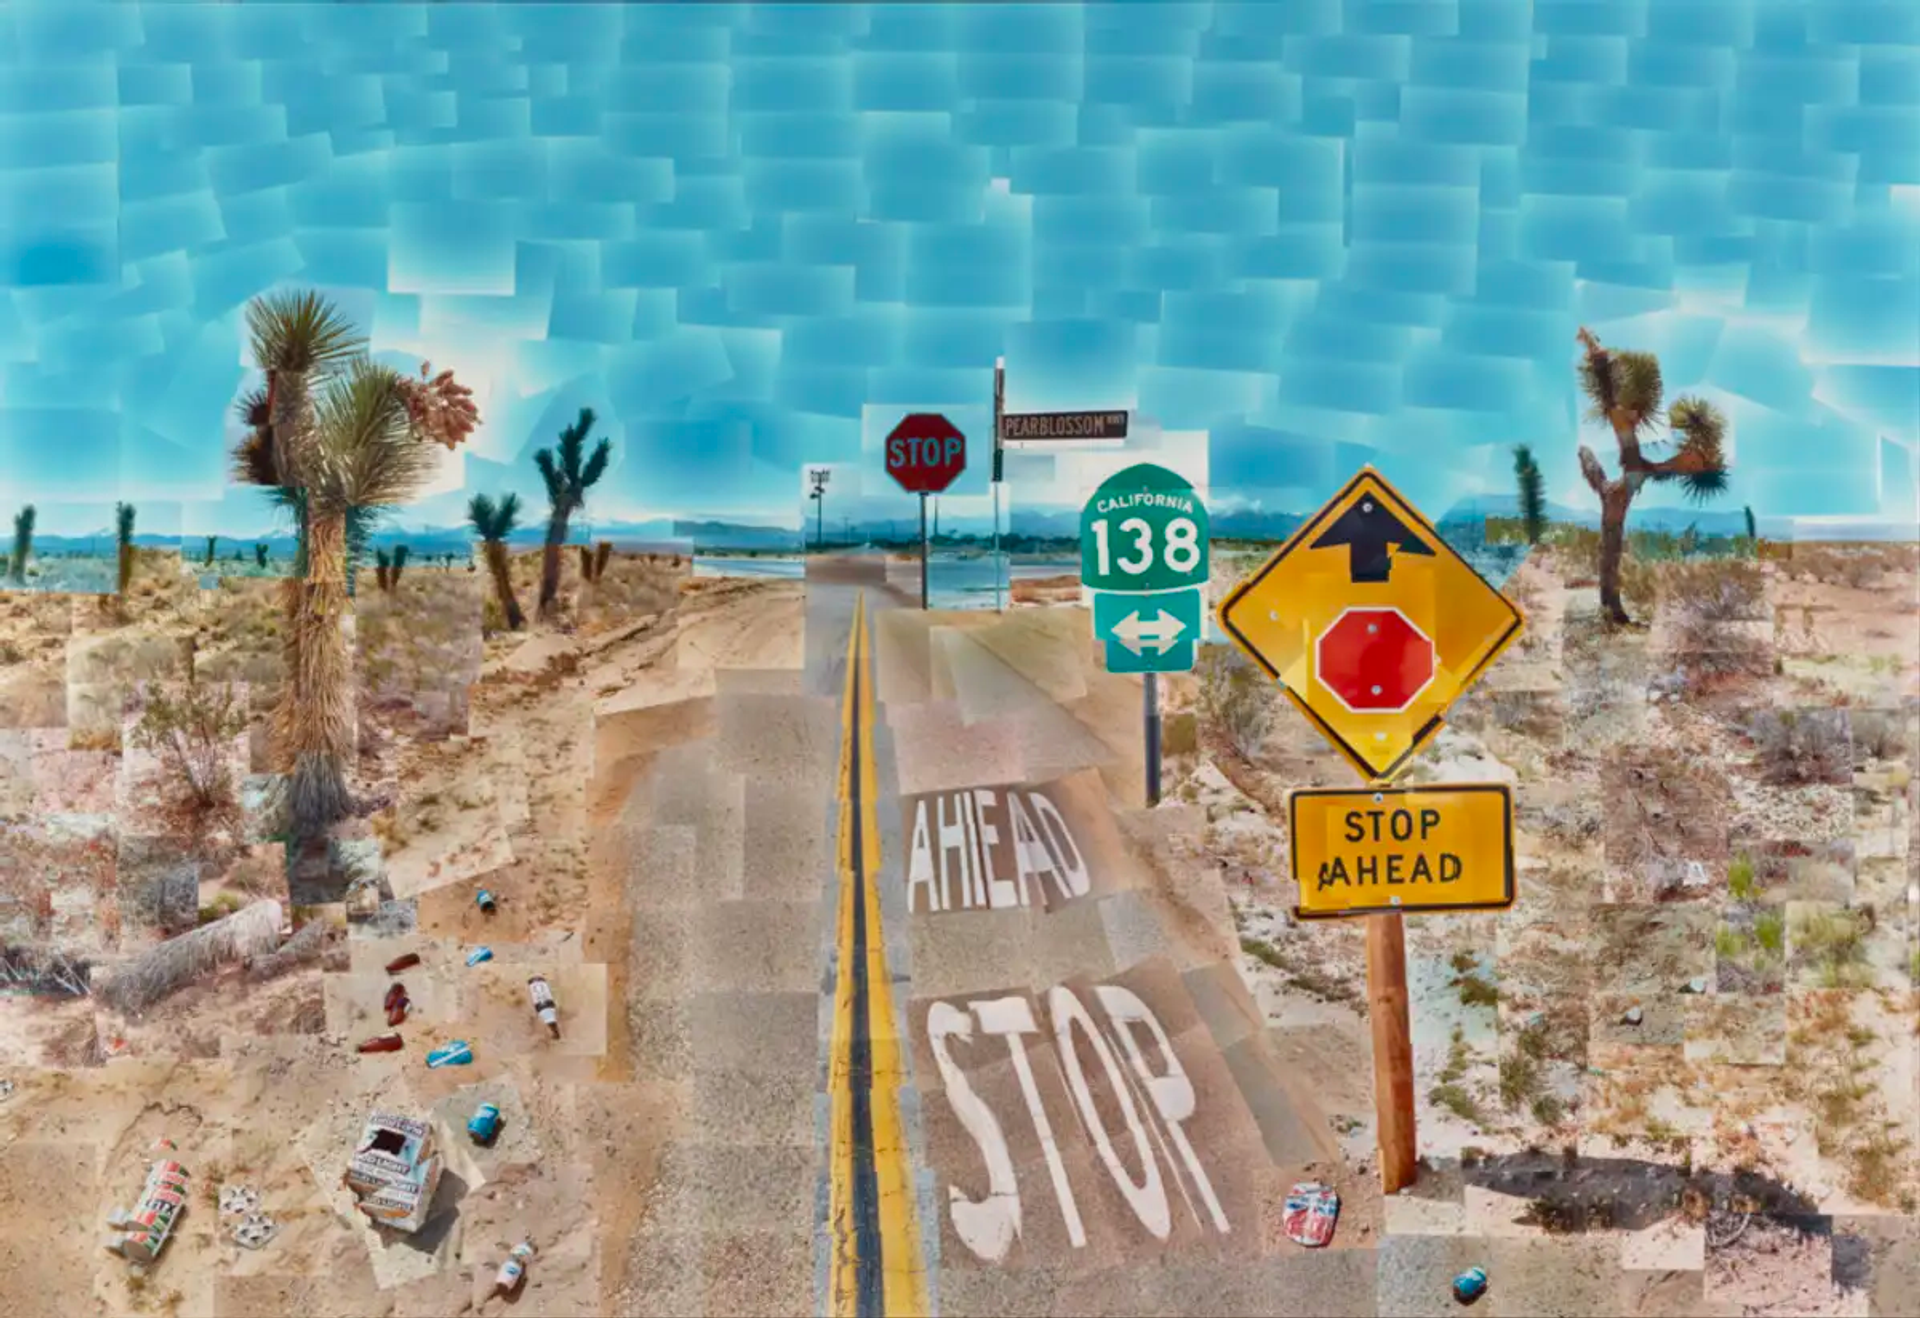 A photomontage of a U.S. highway in the desert of California. Road signs read ‘STOP AHEAD’, ‘CALIFORNIA 138’ and ‘PEARLBLOSSOM HWY’, with a further ‘STOP’ sign in the distance.